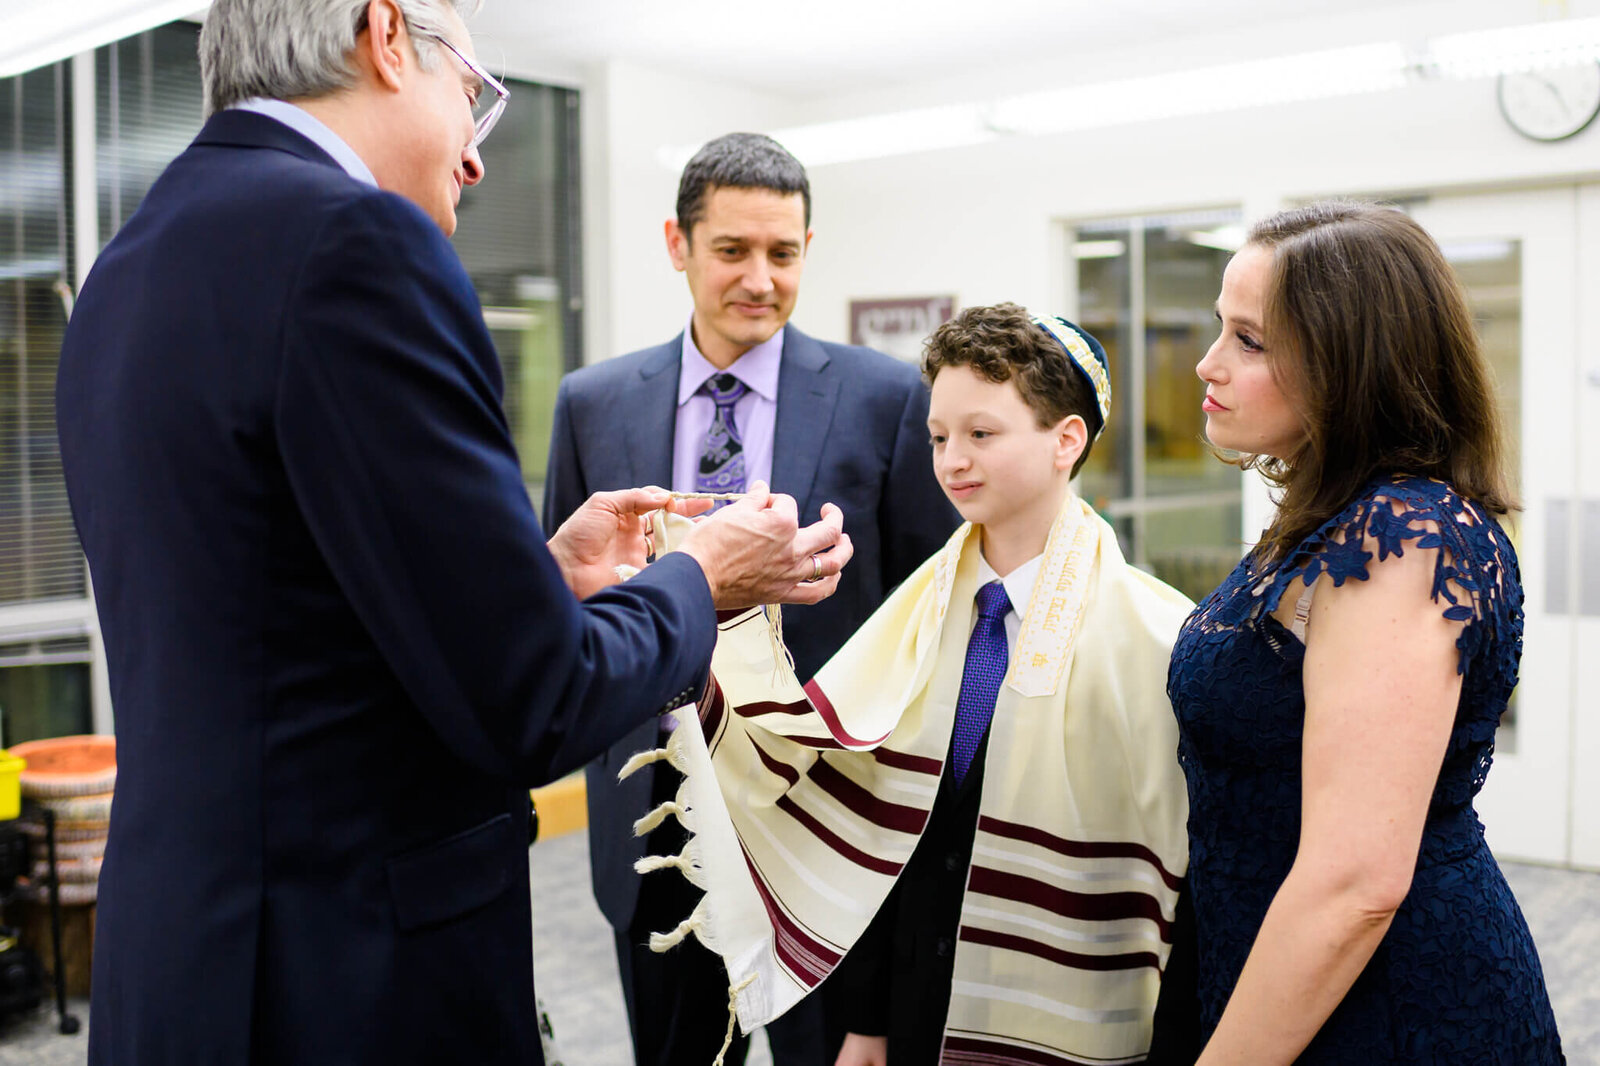 A teen boy in a Kippah and Tallit speaks with a Rabbi about the cords on his tallit during his bar mitzvah with mom and dad